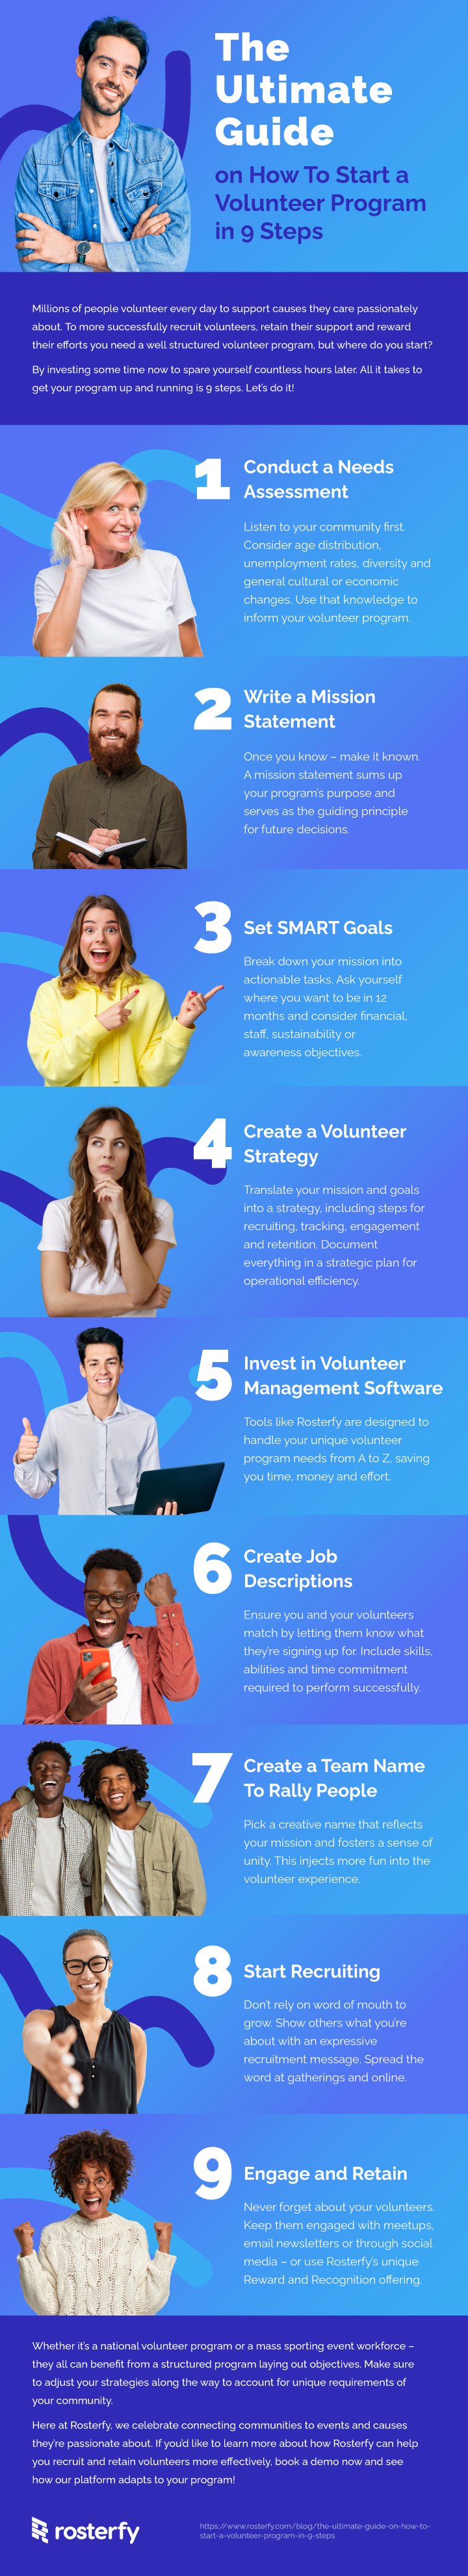 Rosterfy - Infographic - The ultimate guide on how to start a volunteer program in 9 steps